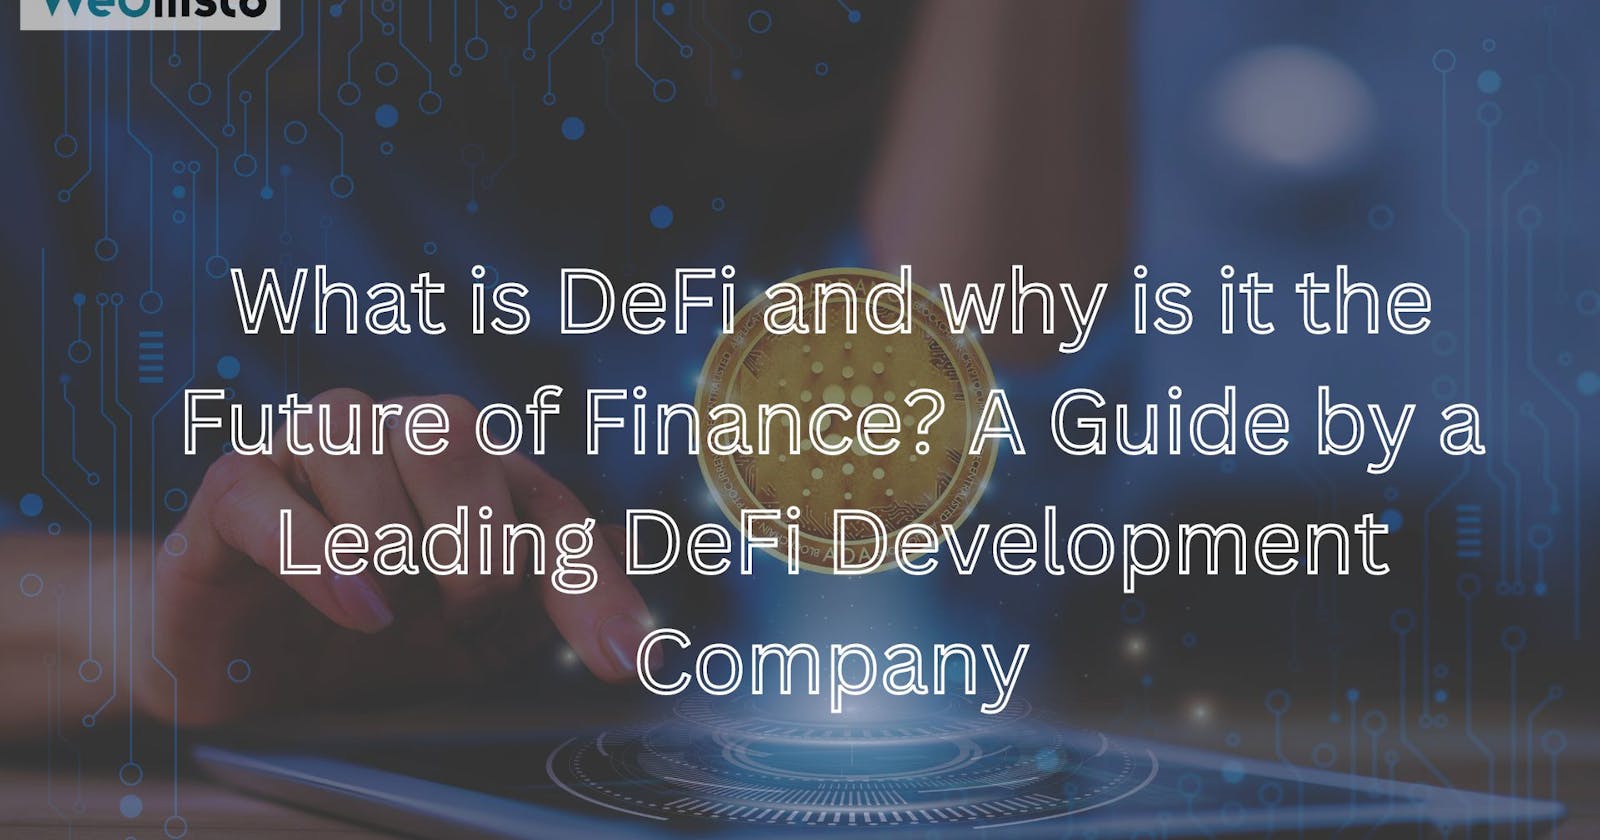 What is DeFi and why is it the Future of Finance? A Guide by a Leading DeFi Development Company